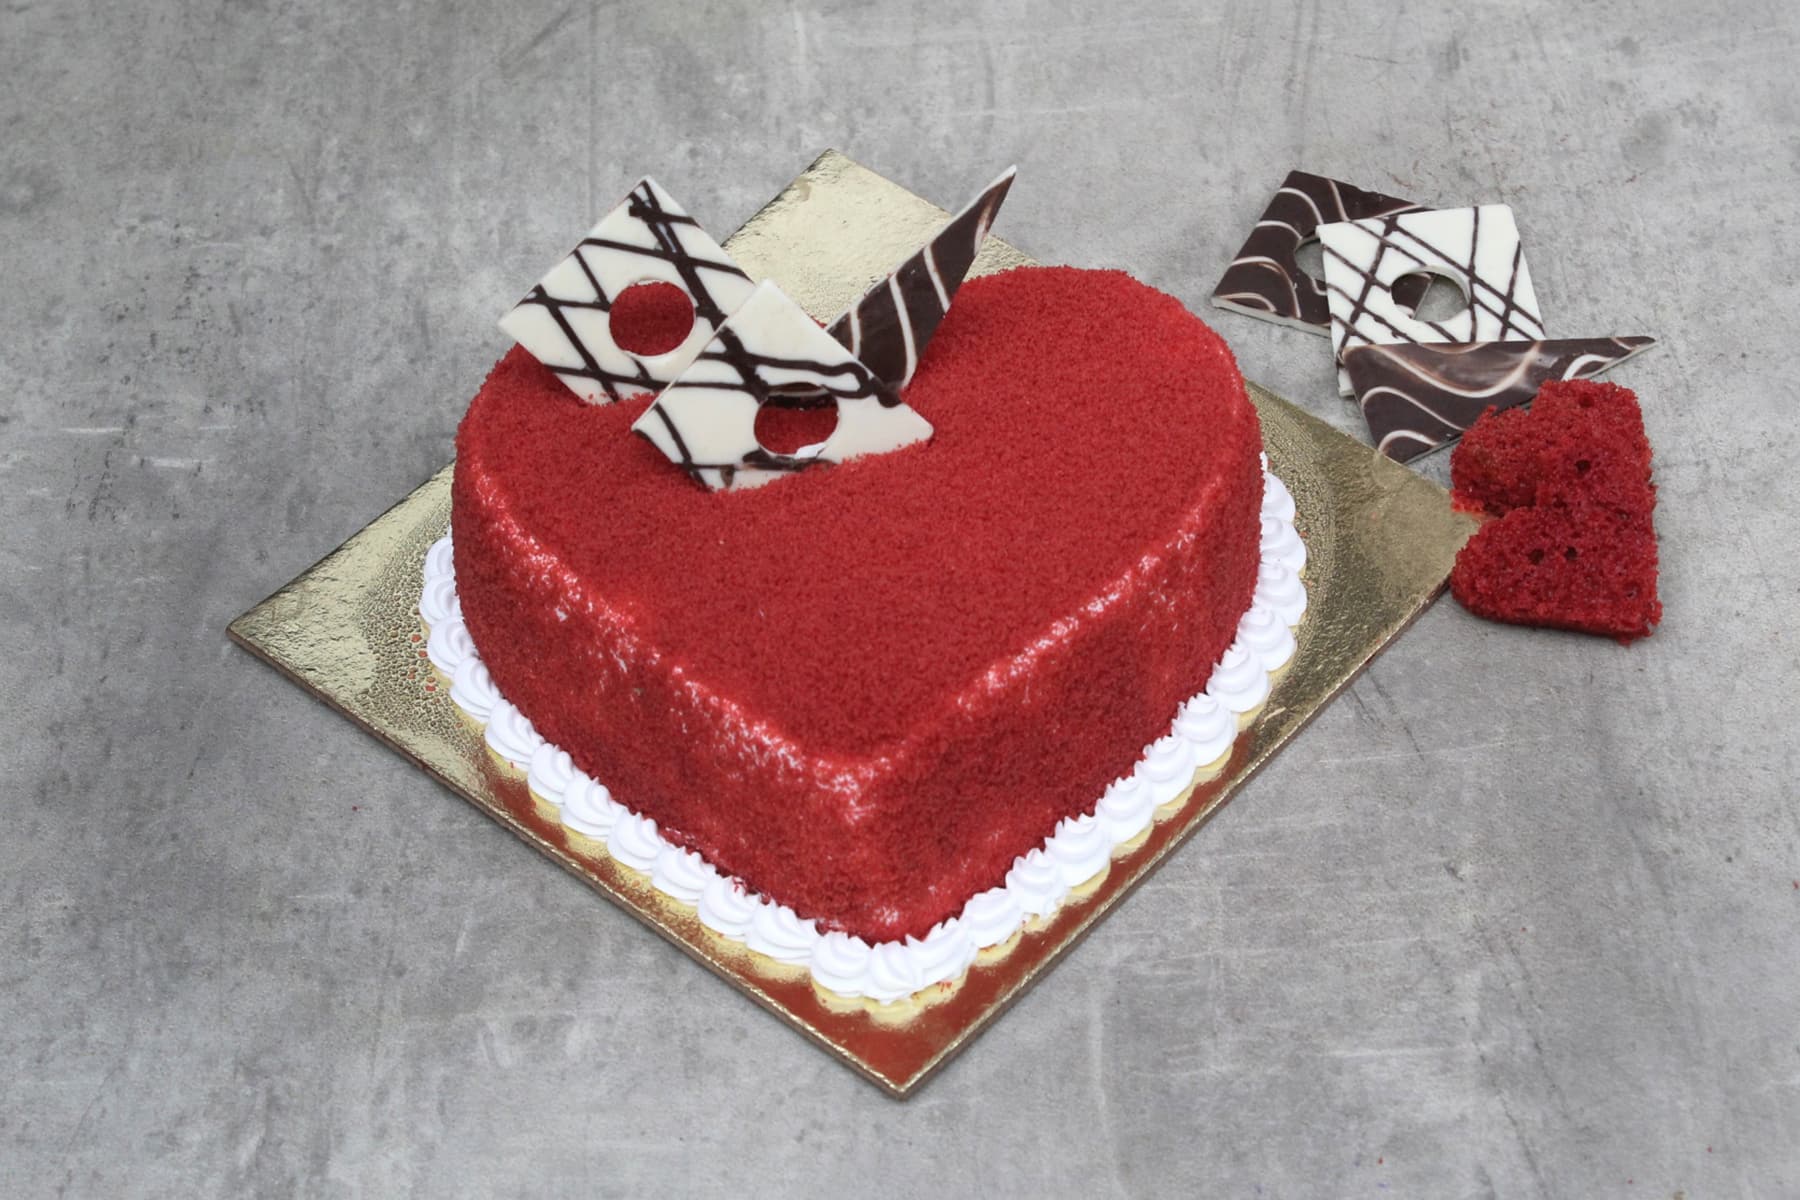 How To Make Double Heart Cake | Most Engagement Cake - YouTube